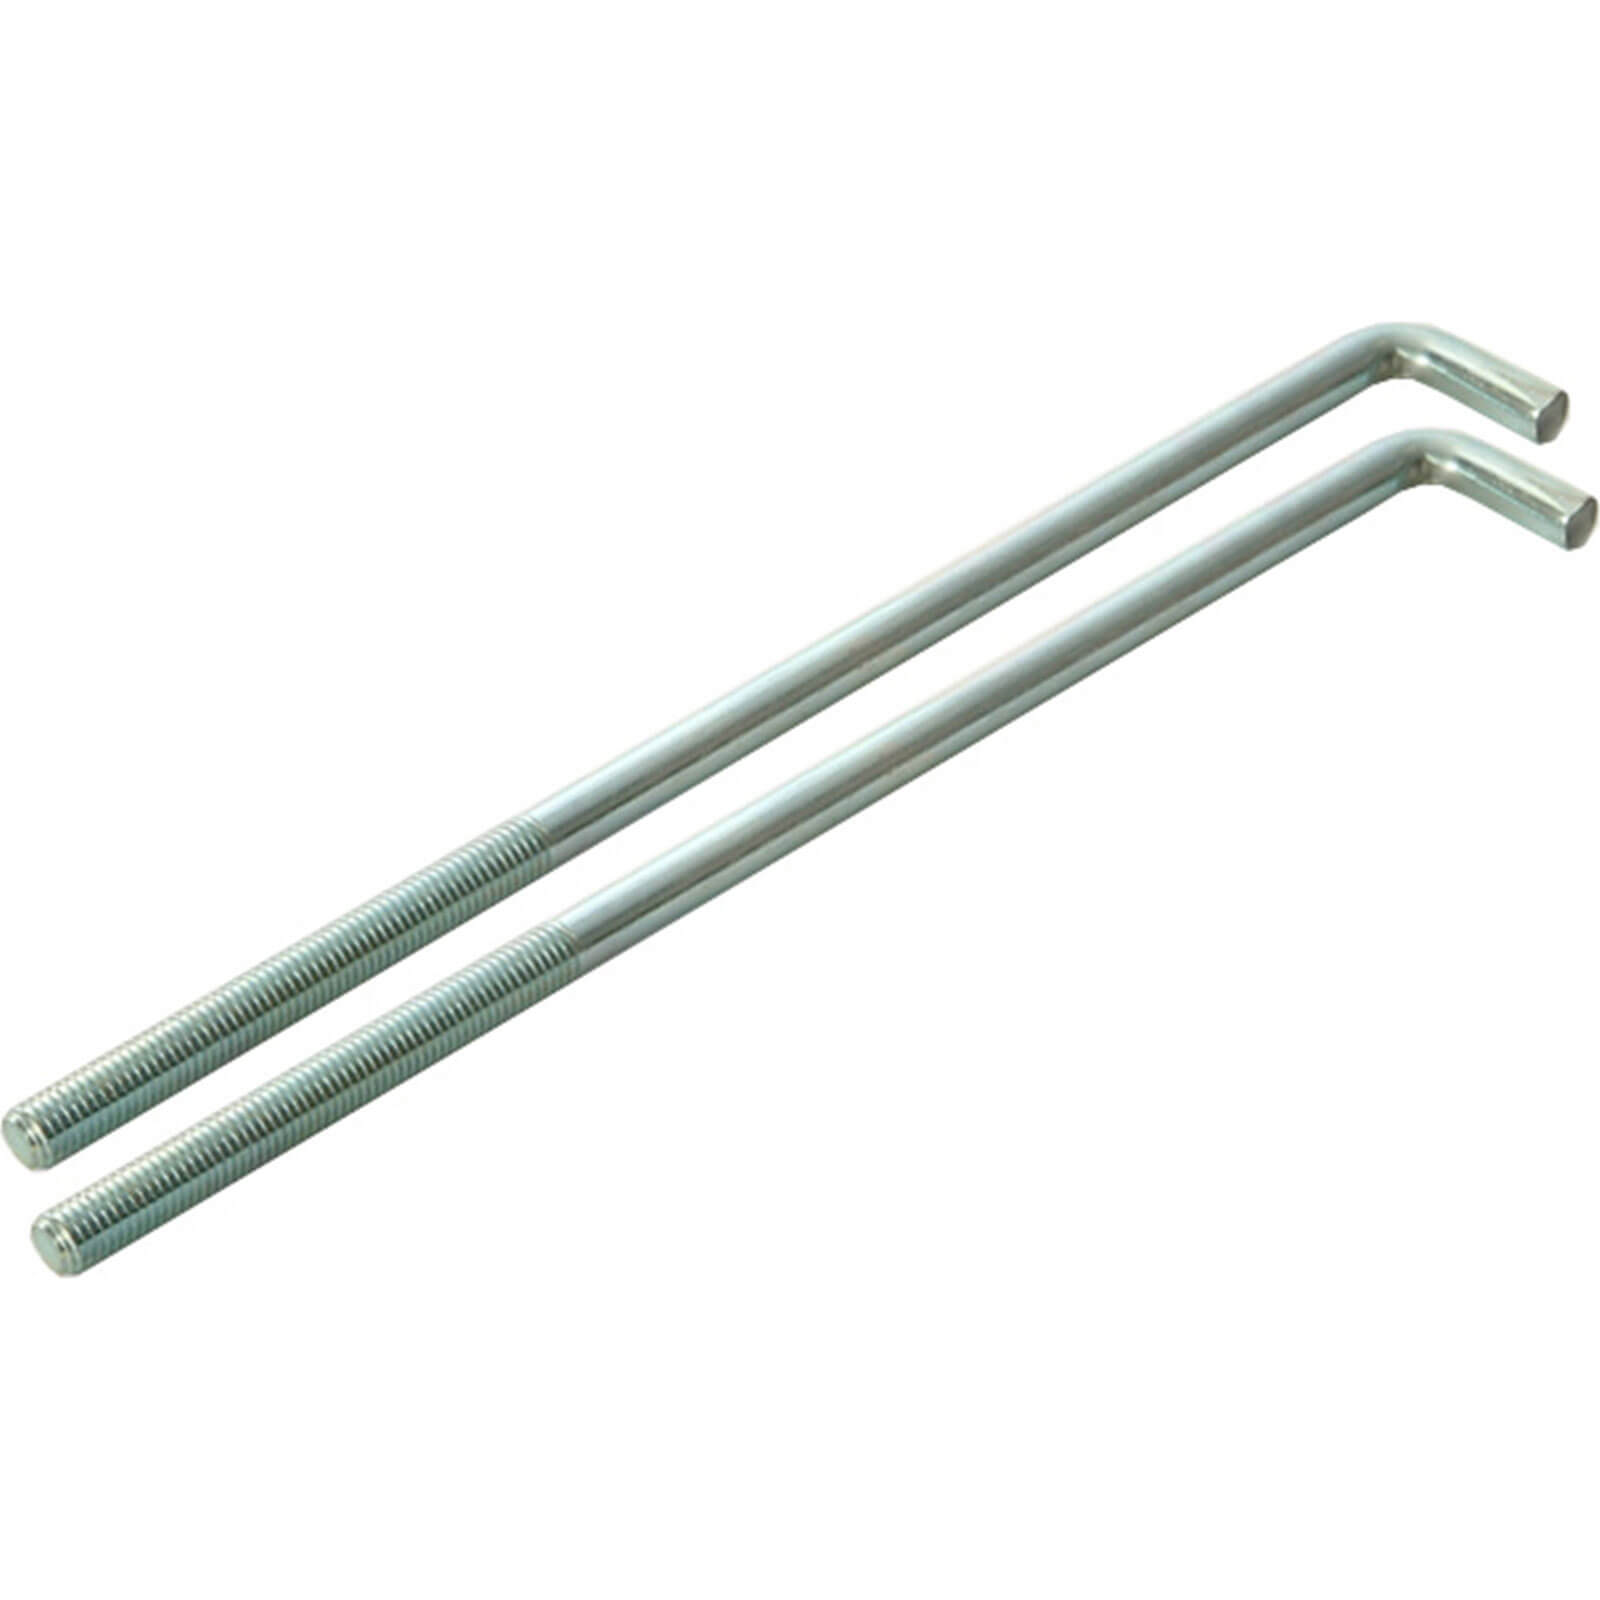 Image of Faithfull External Building Profile Bolts 230mm Pack of 2